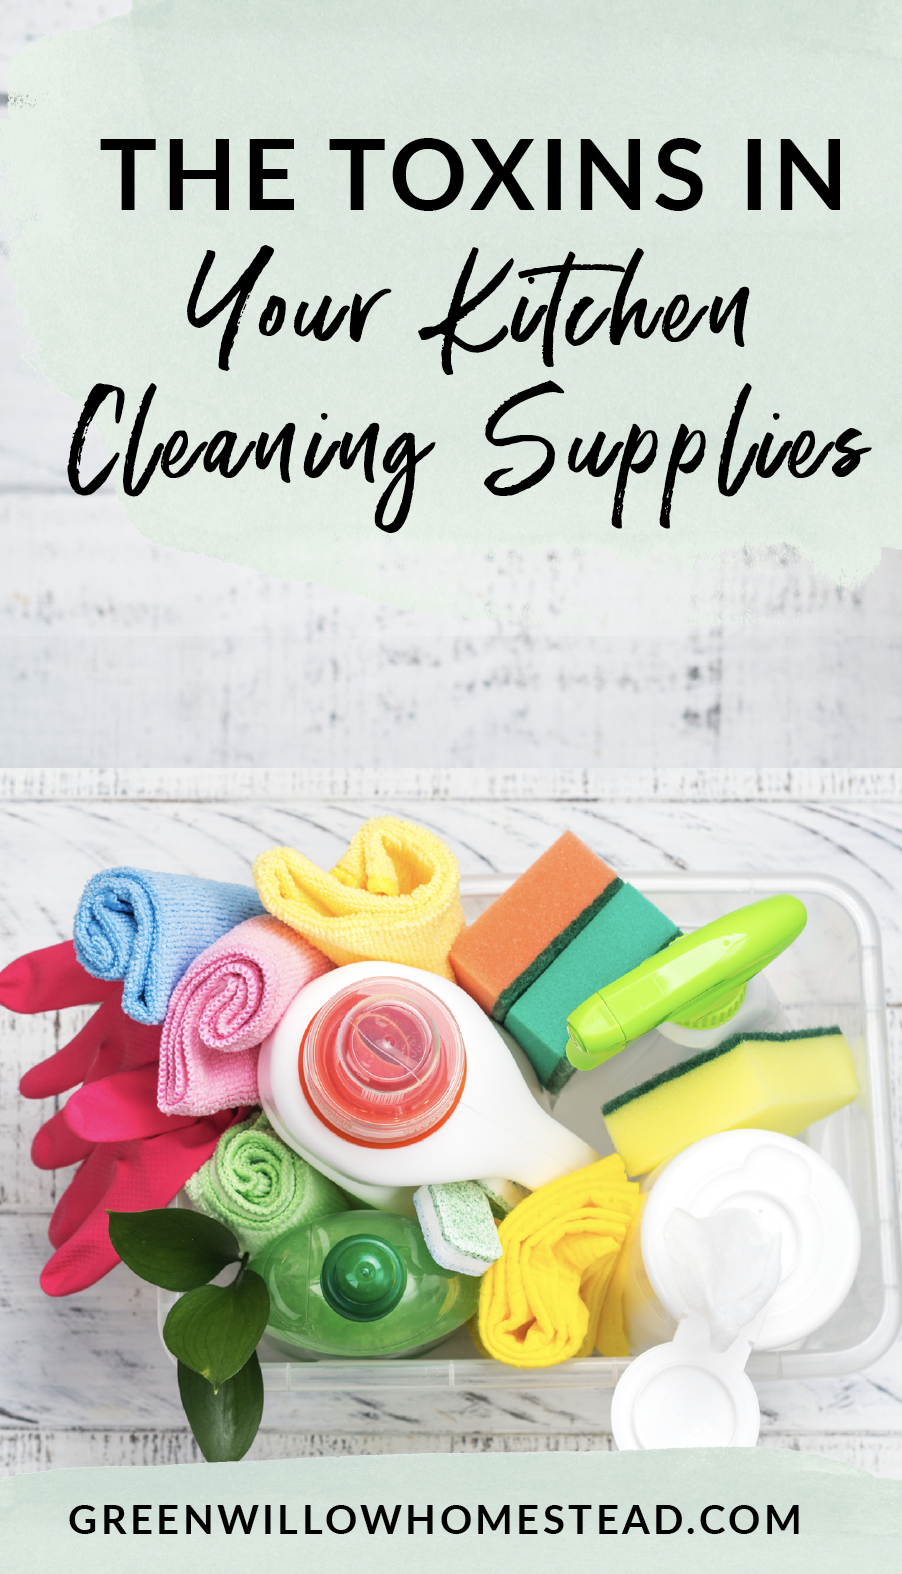 What toxins are in kitchen cleaning supplies and should you be concerned?